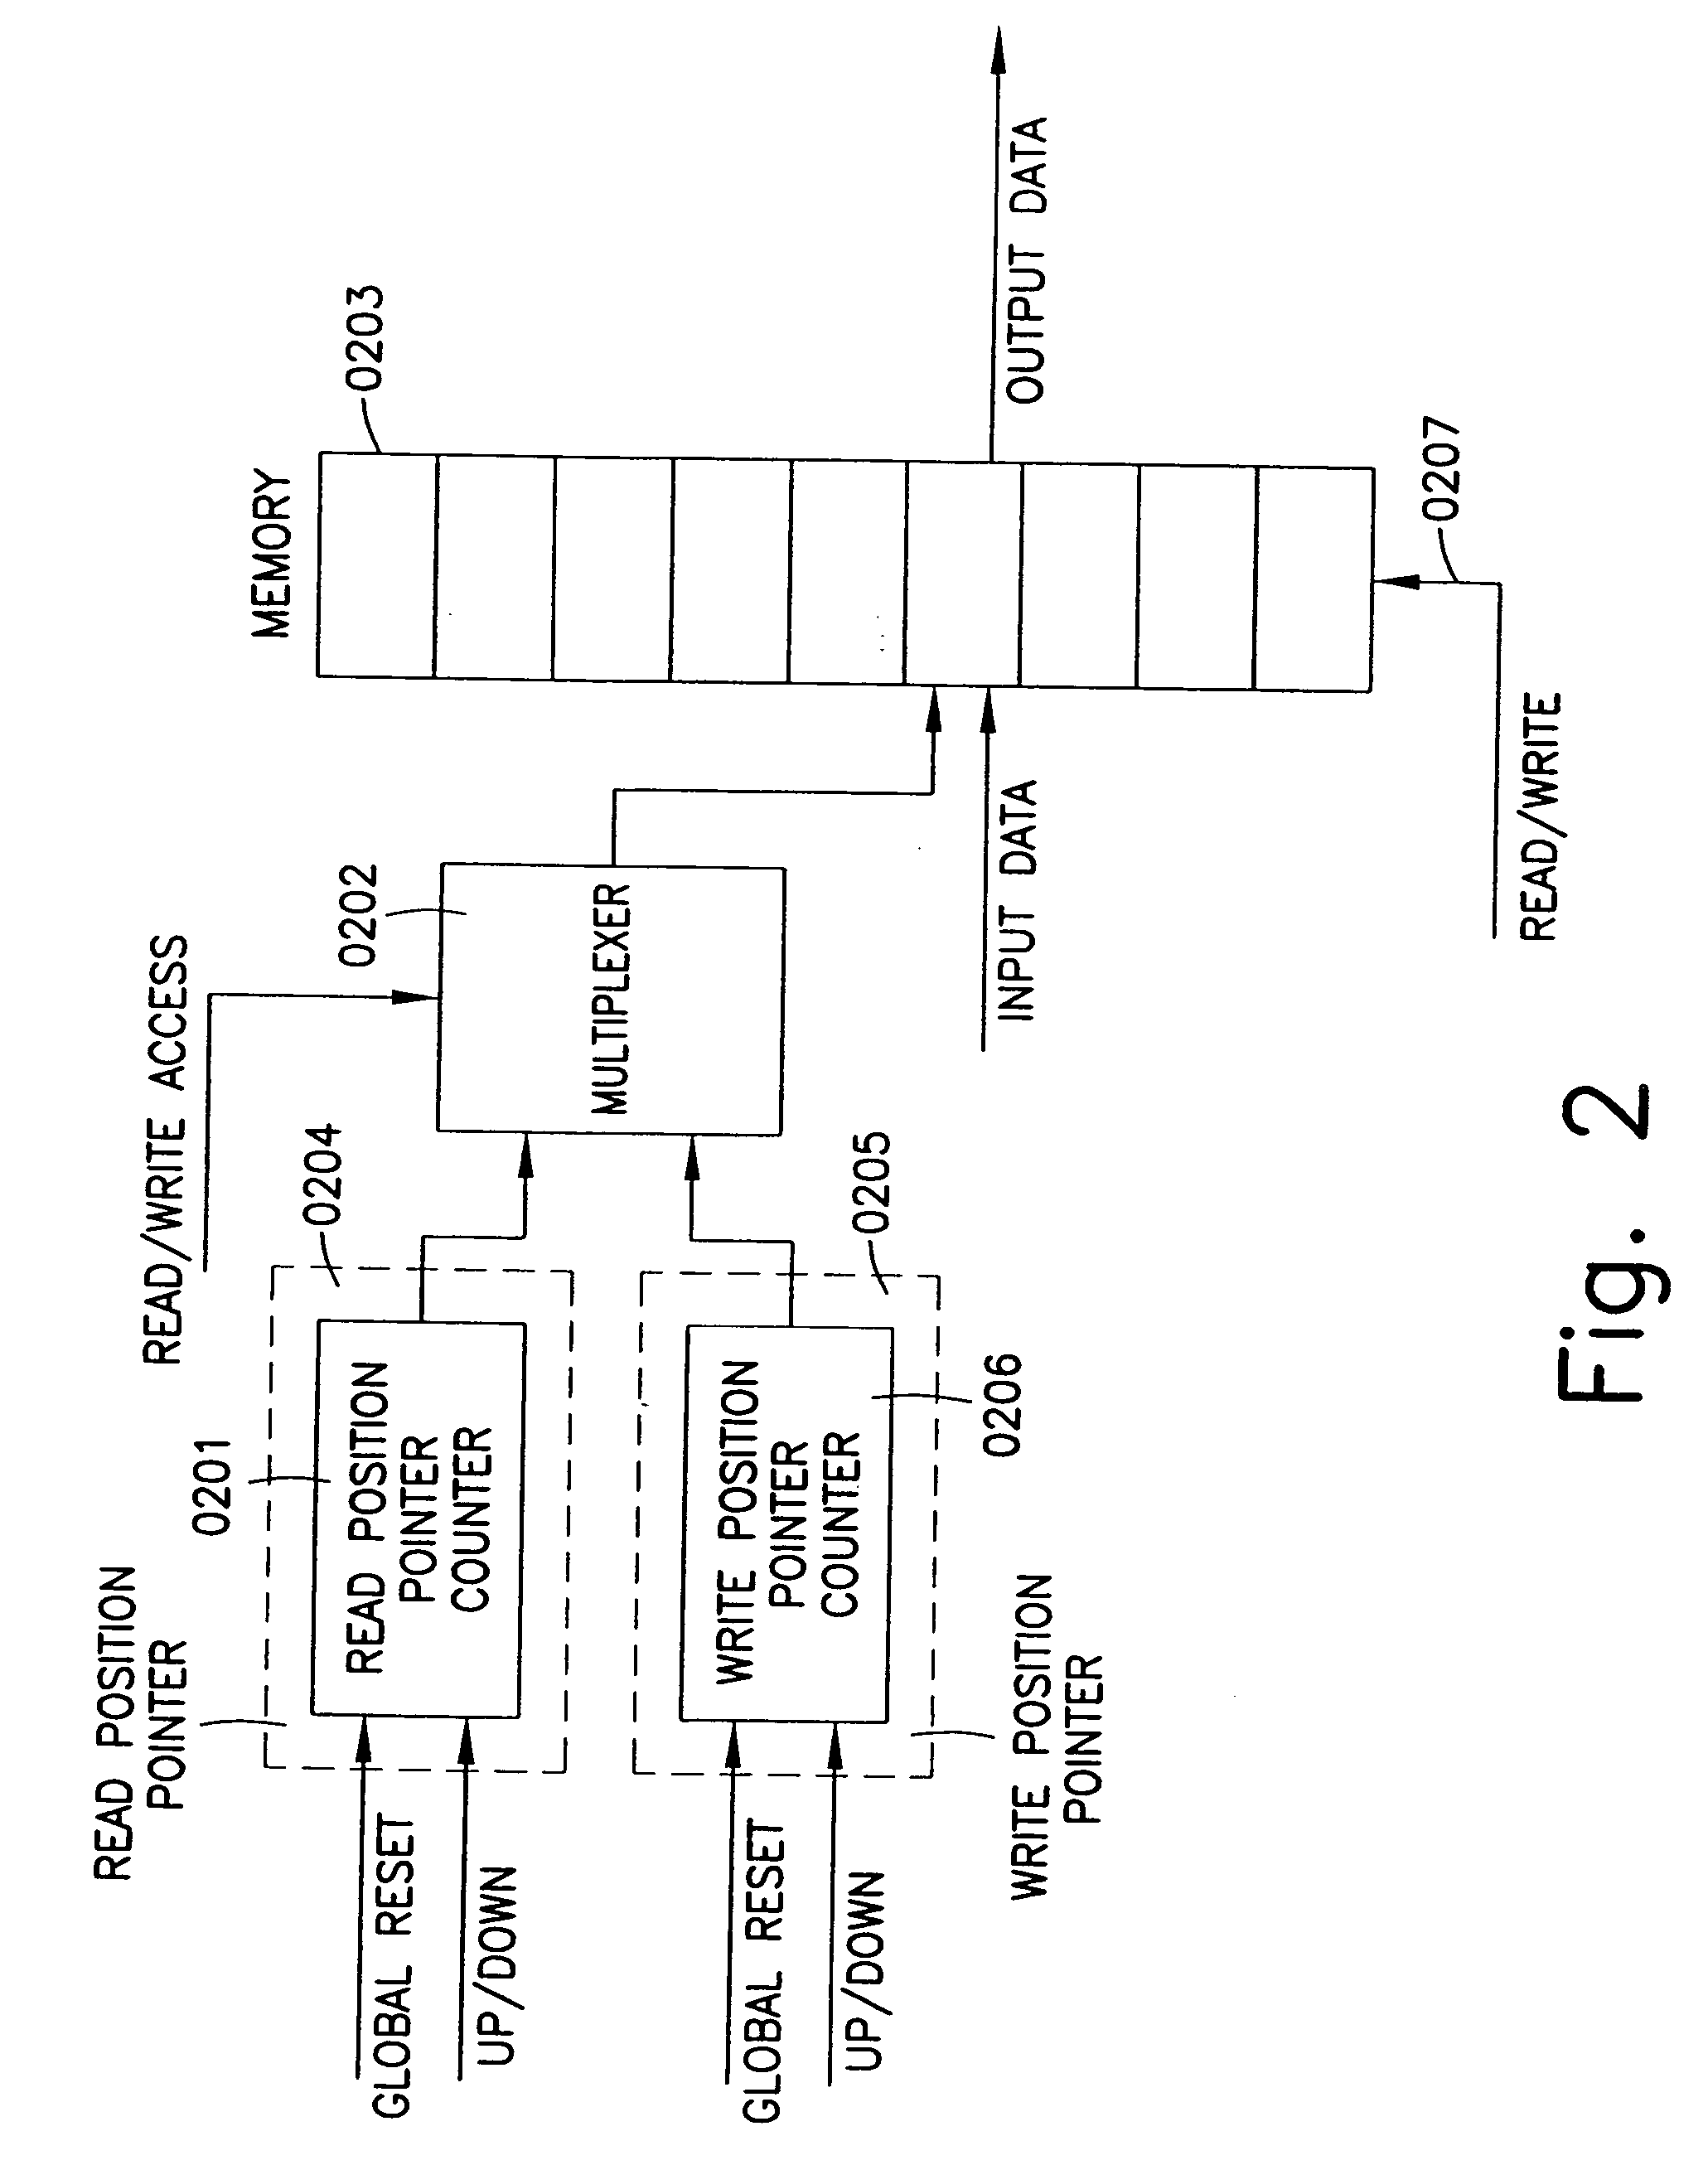 Process for automatic dynamic reloading of data flow processors (DFPs) and units with two- or three-dimensional programmable cell architectures (FPGAs, DPGAs, and the like